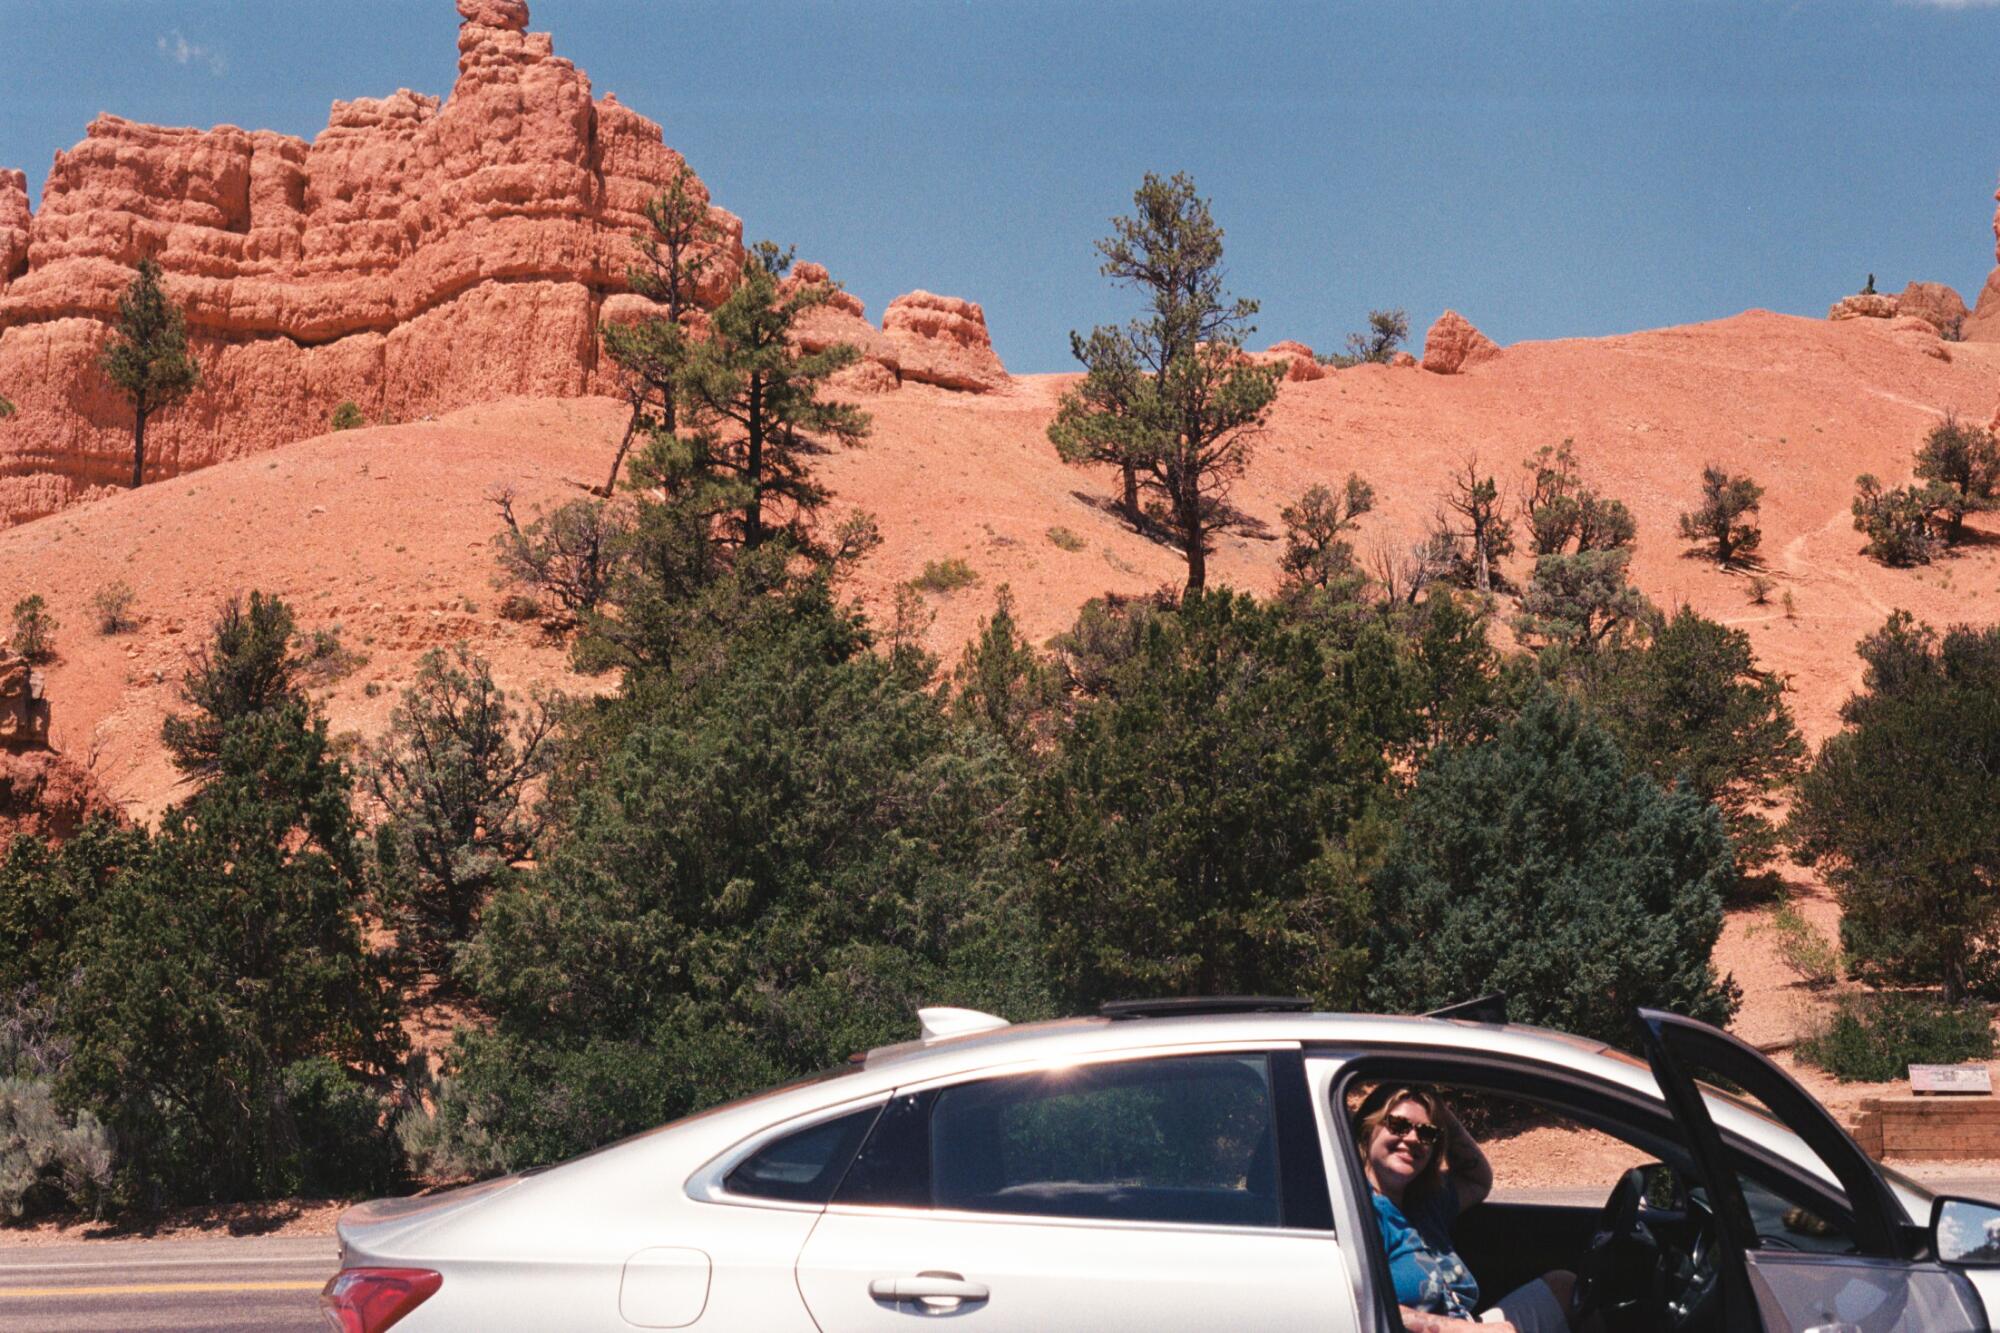 Julia driving through Bryce Canyon National Park on the Grand Circle road trip.